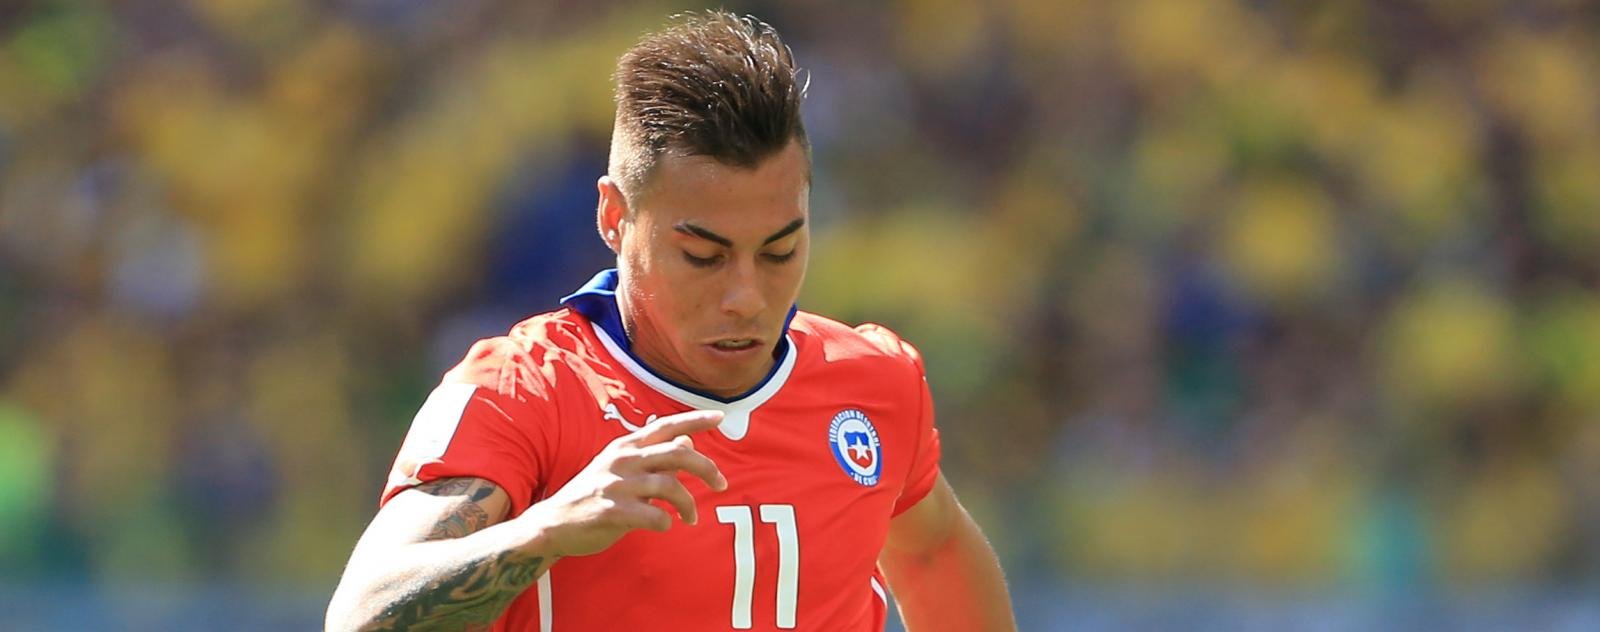 West Ham pondering move for Chile international